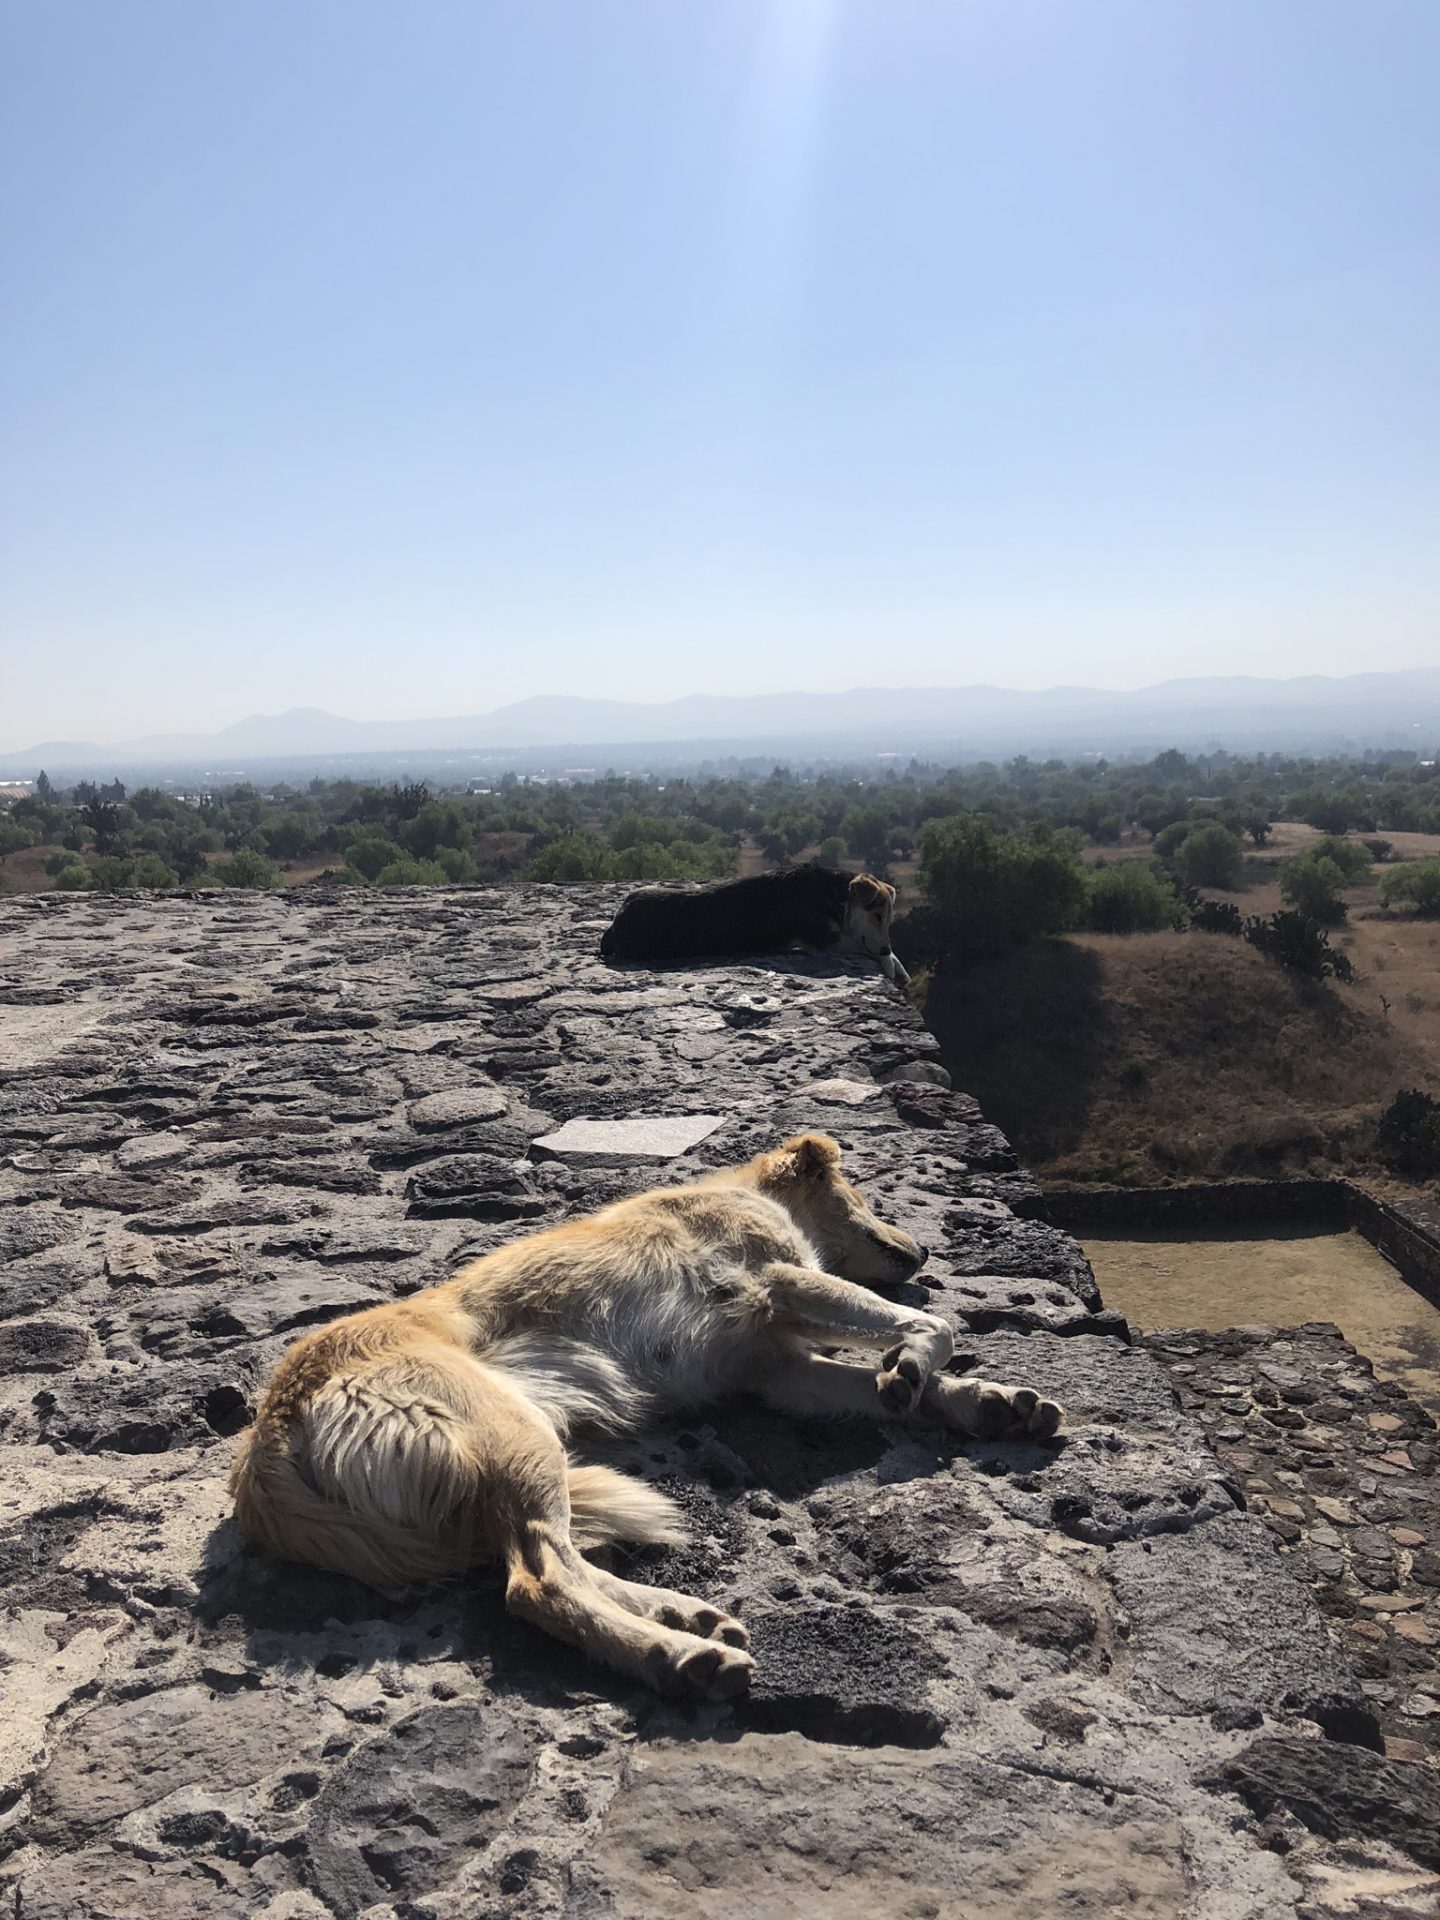 Dogs asleep in the sun on the Pyramid of the Moon